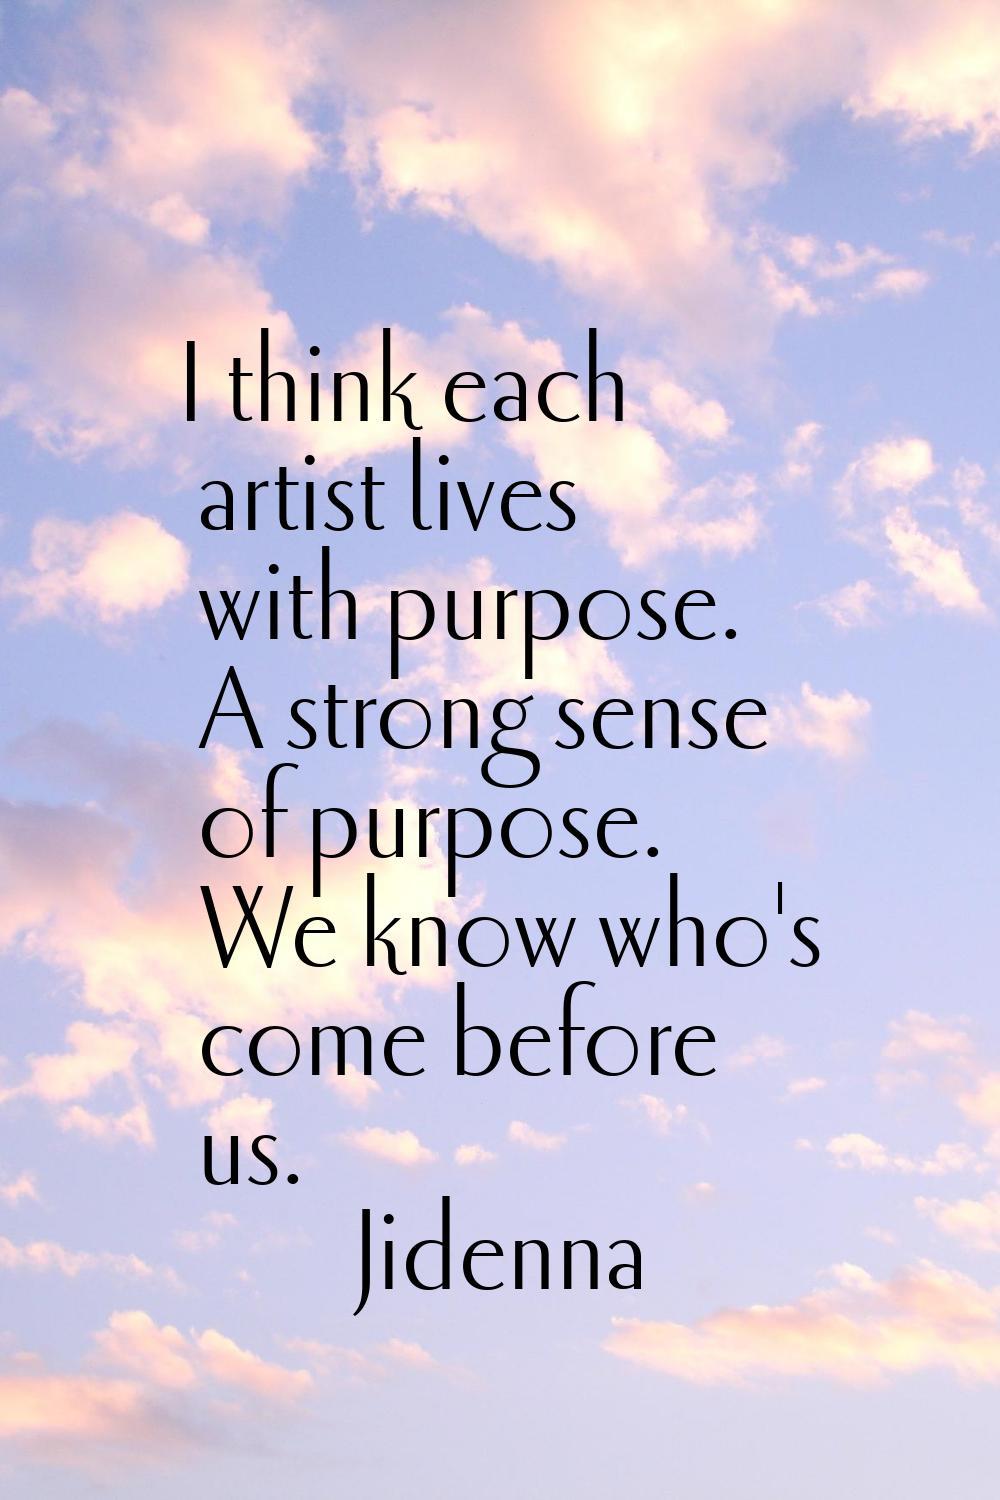 I think each artist lives with purpose. A strong sense of purpose. We know who's come before us.